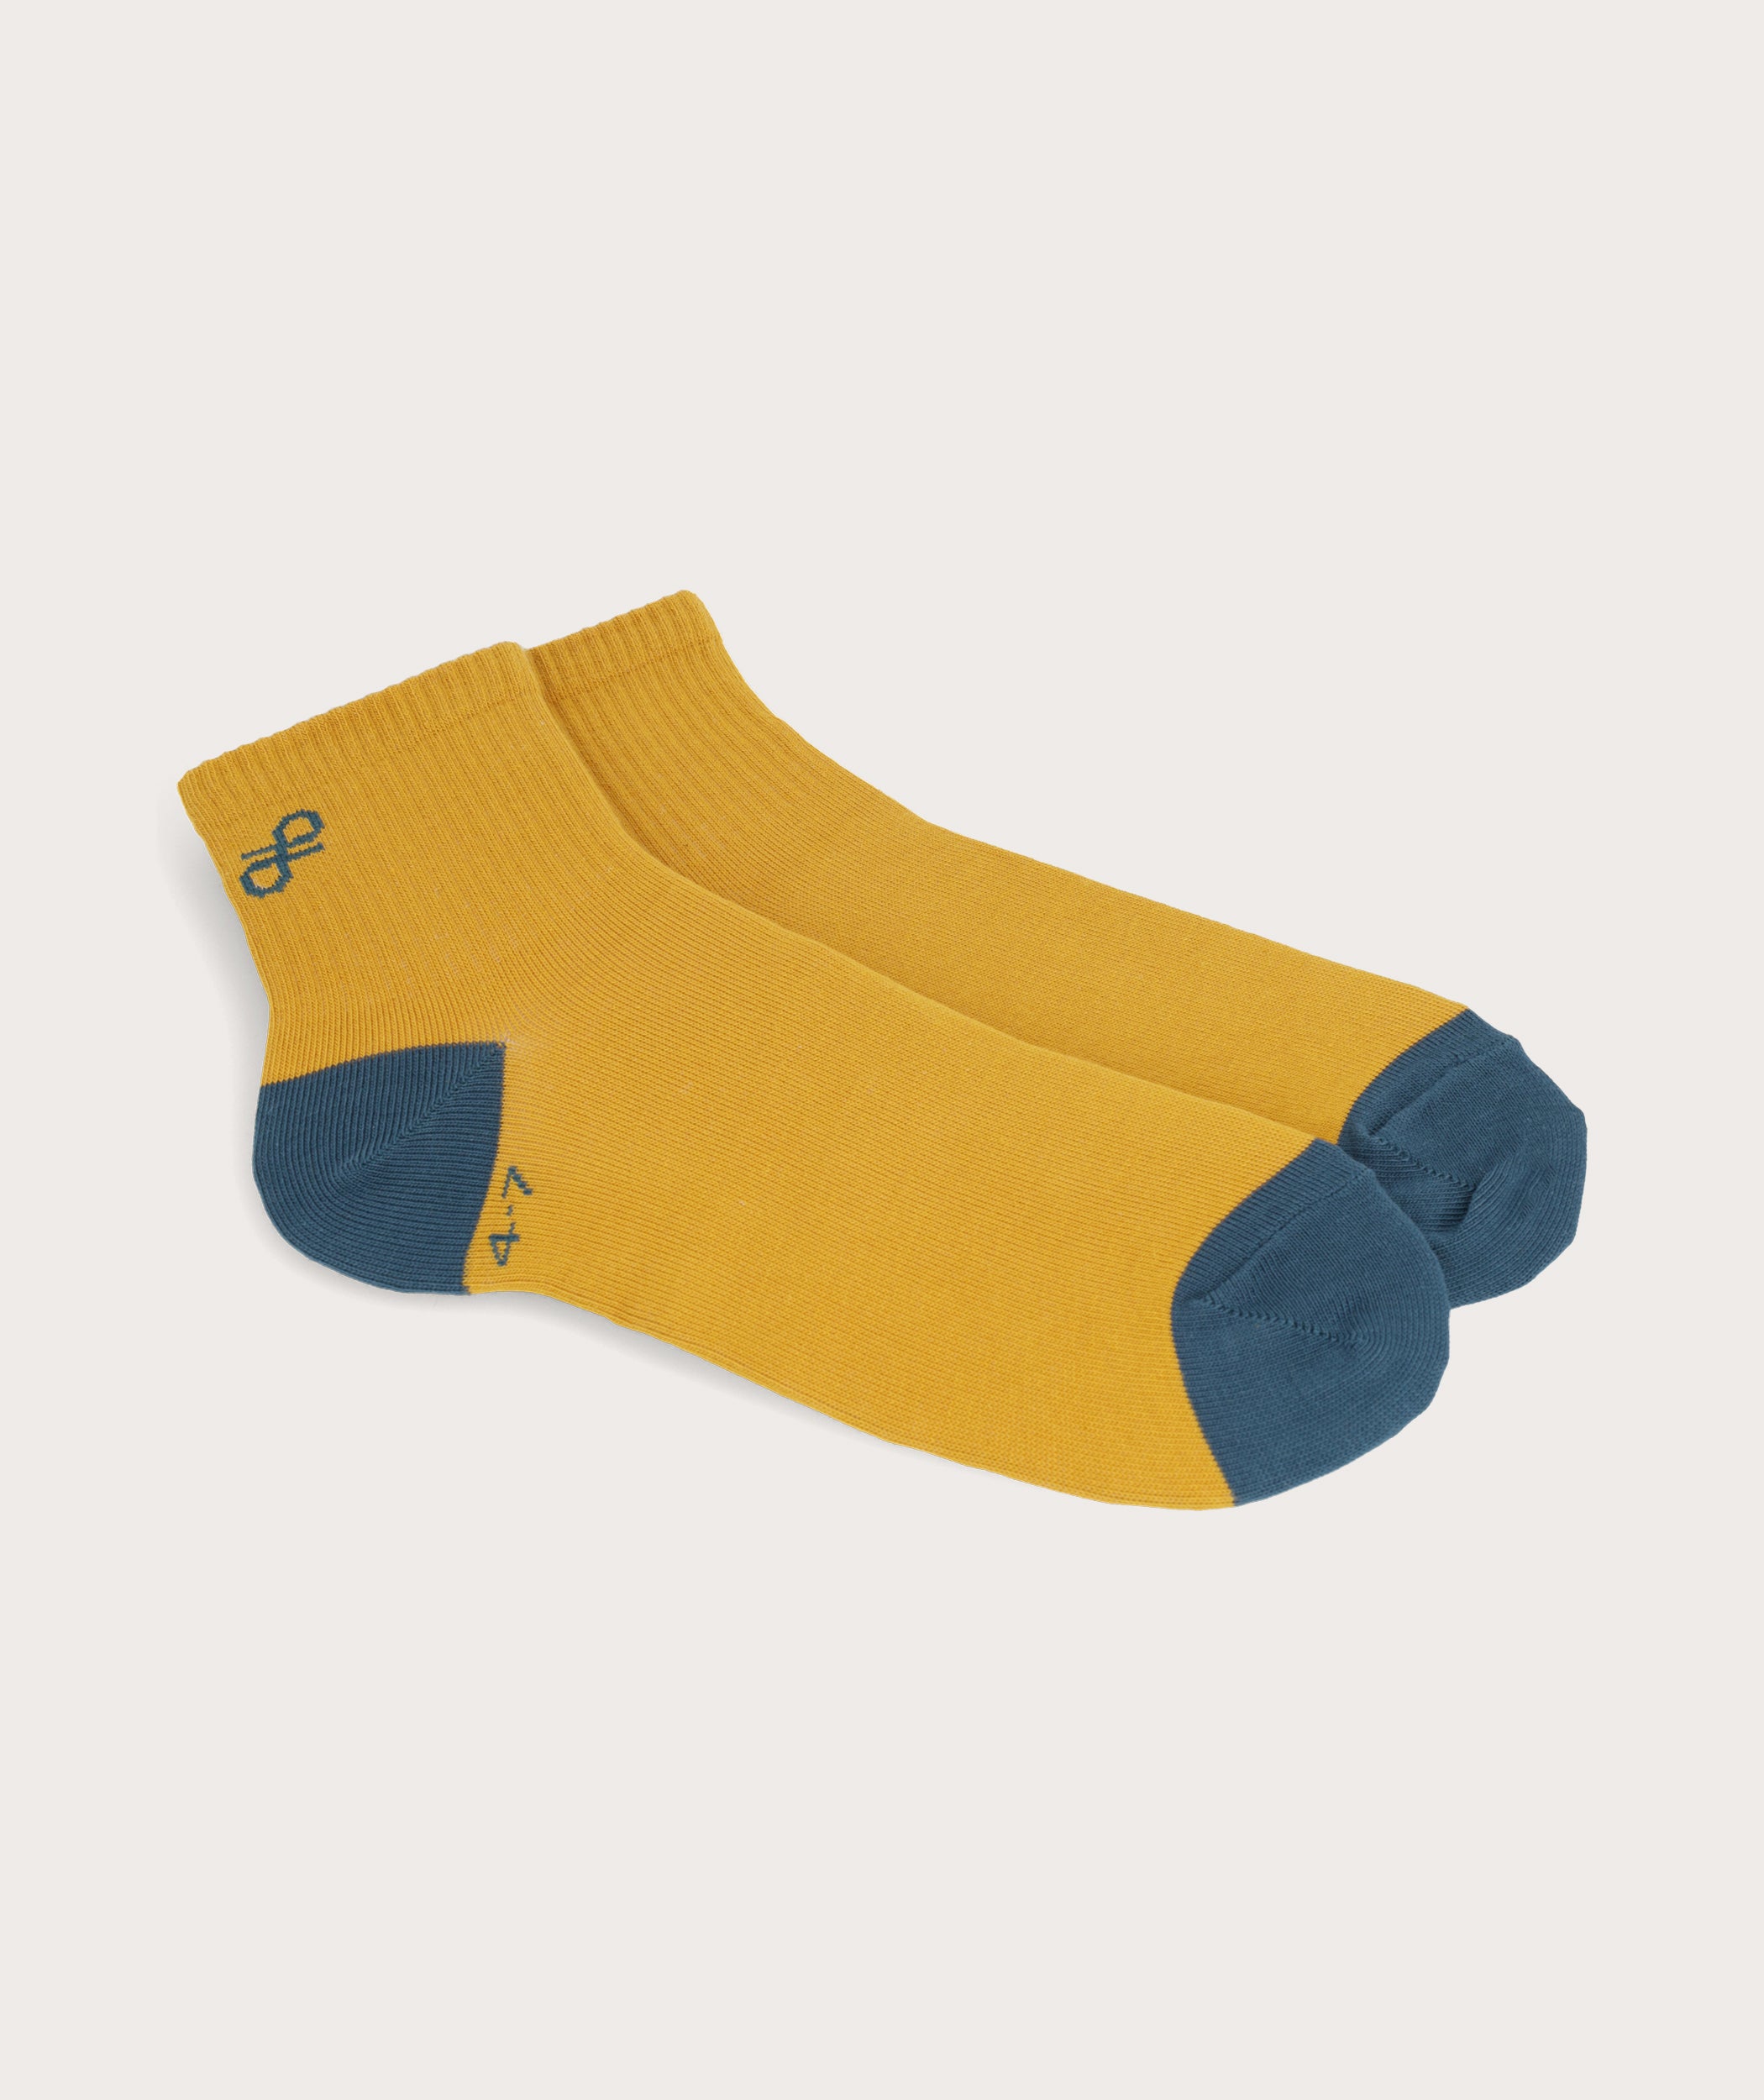 Socks FOM Active - Mustard & Airforce (Size 4-7)